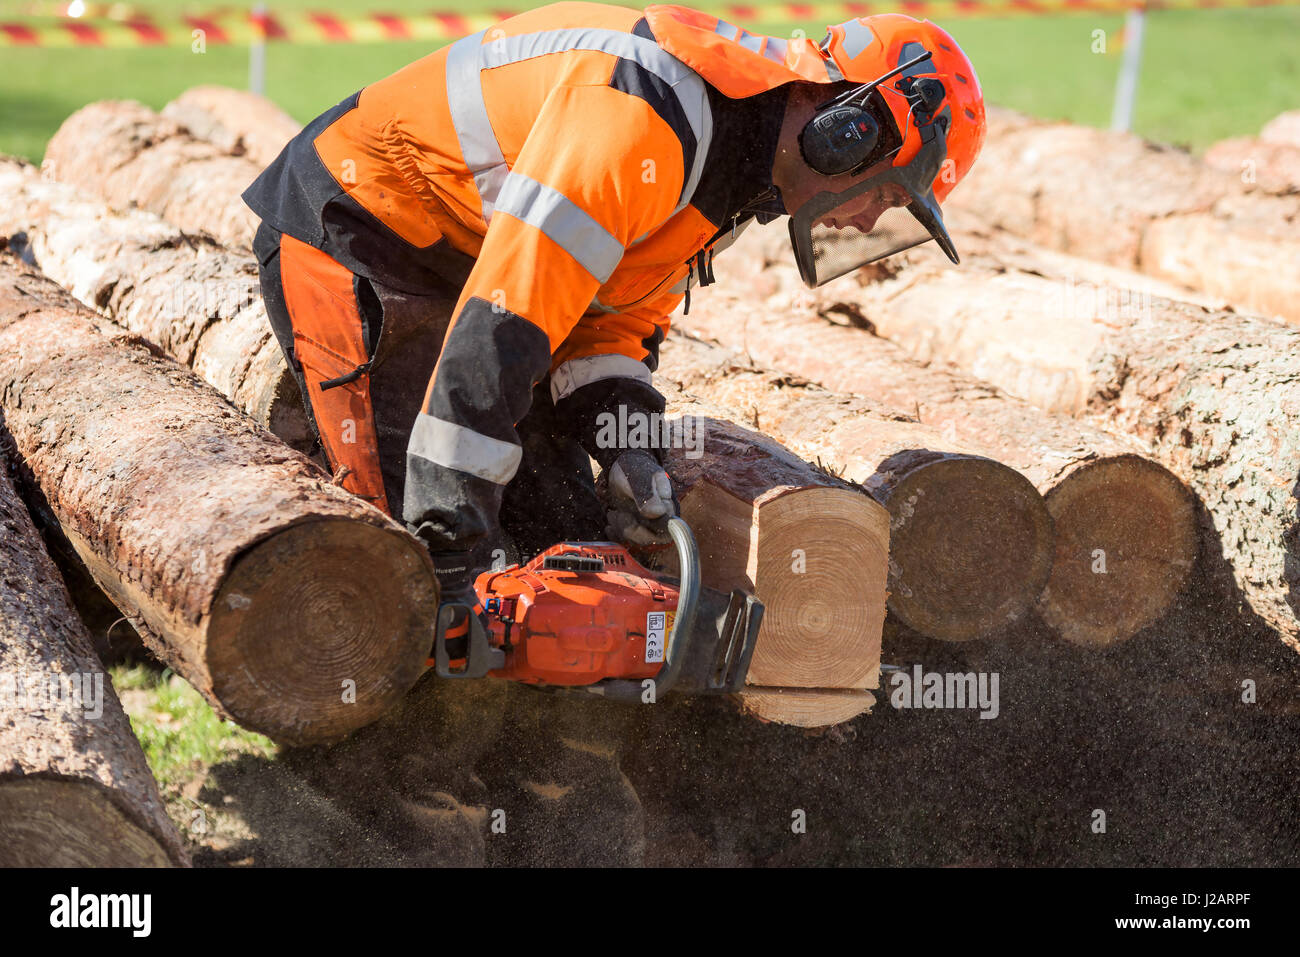 Brakne Hoby, Sweden - April 22, 2017: Documentary of small public farmers day. Young timberman demonstrating how to use a chain saw on a log. Stock Photo